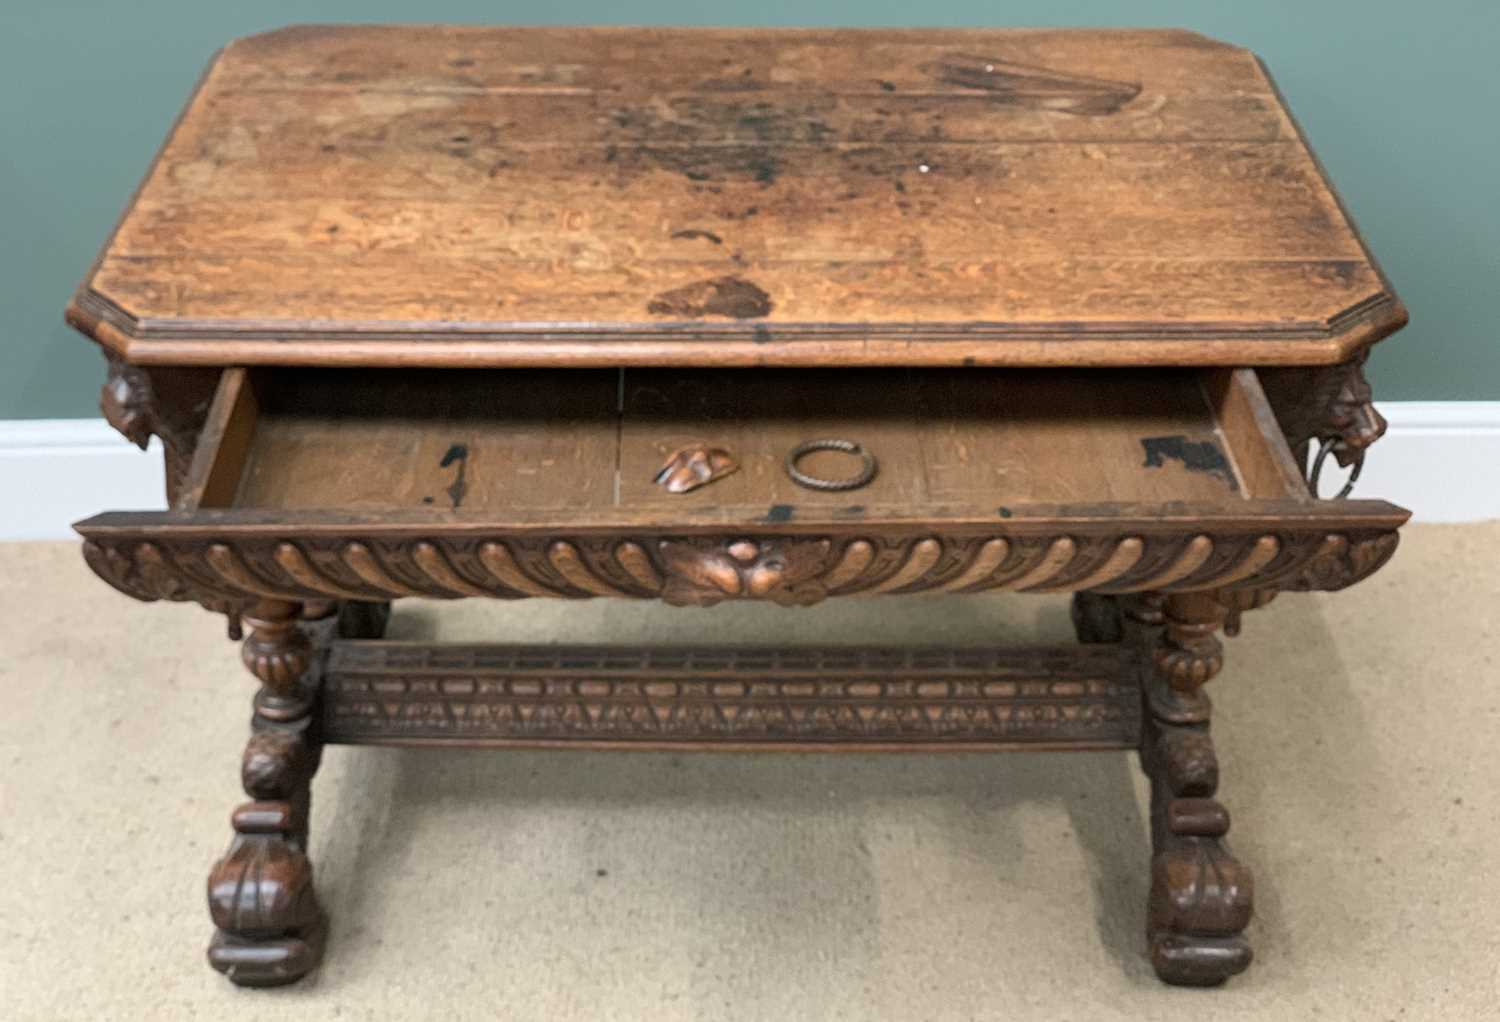 RENAISSANCE REVIVAL STYLE ANTIQUE CARVED OAK LIBRARY TABLE with lion mask detail and single drawer - Image 3 of 5